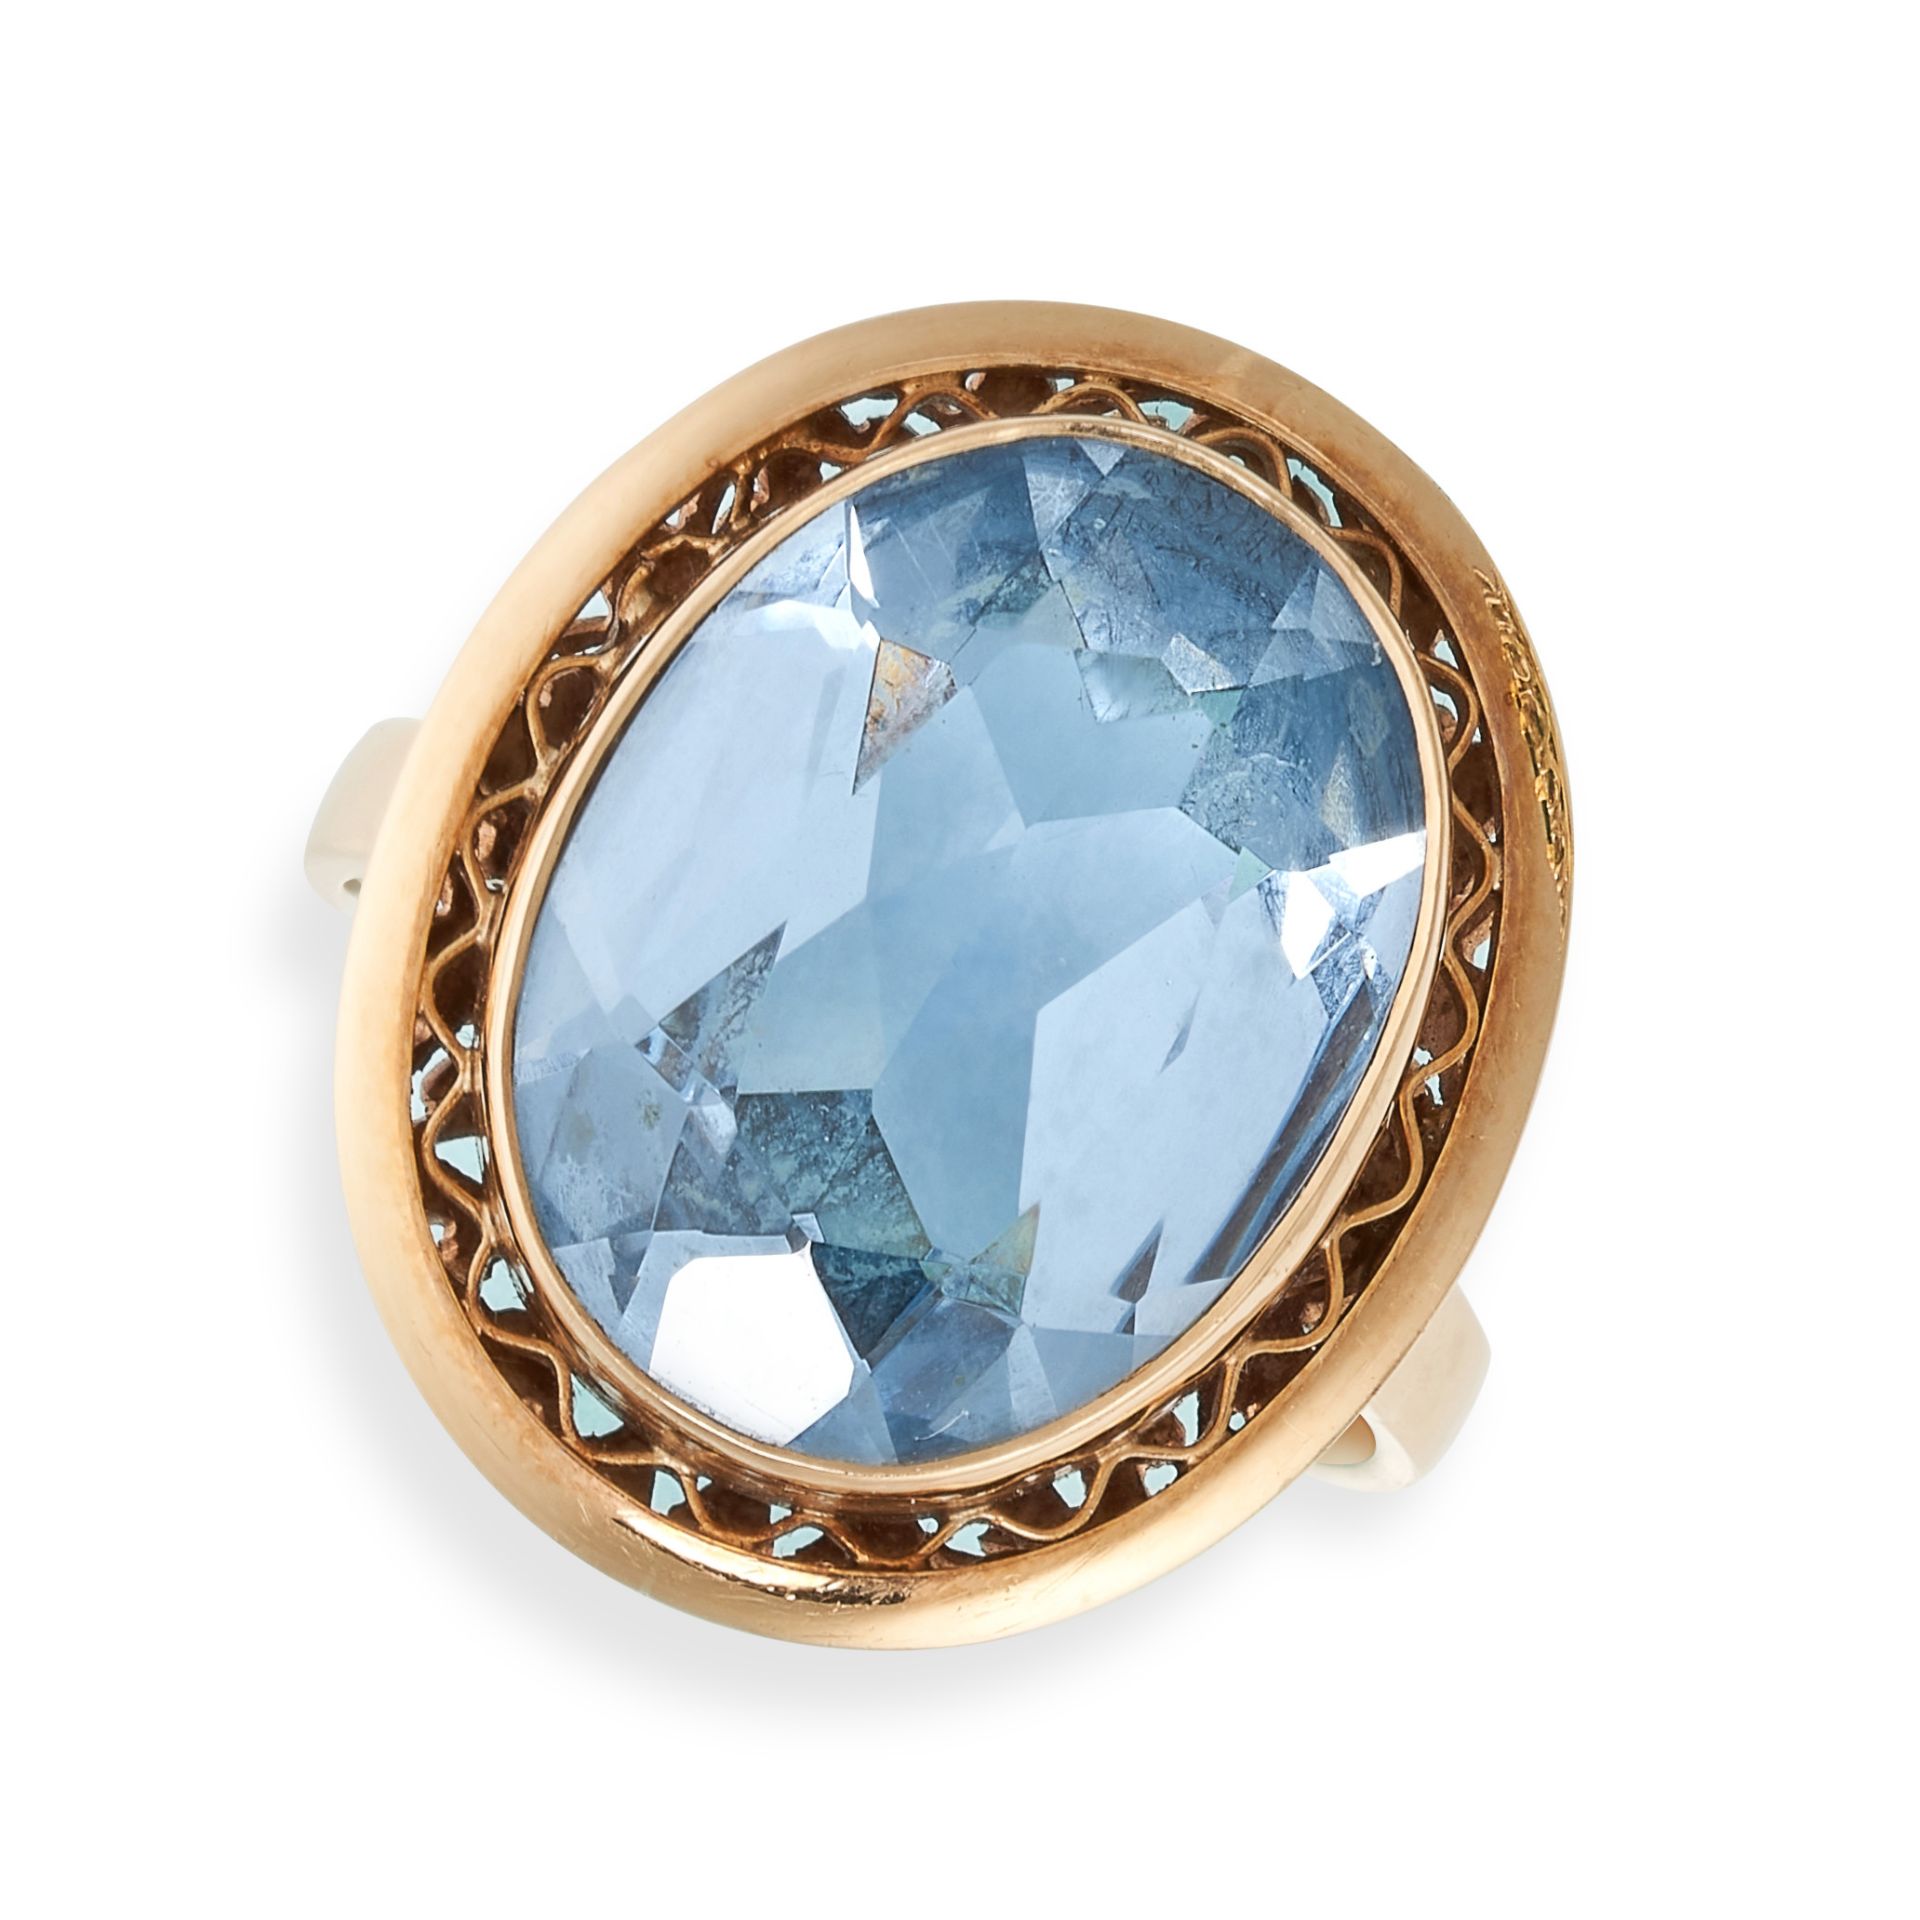 NO RESERVE - A SYNTHETIC BLUE SPINEL DRESS RING in yellow gold, set with an oval synthetic spinel...